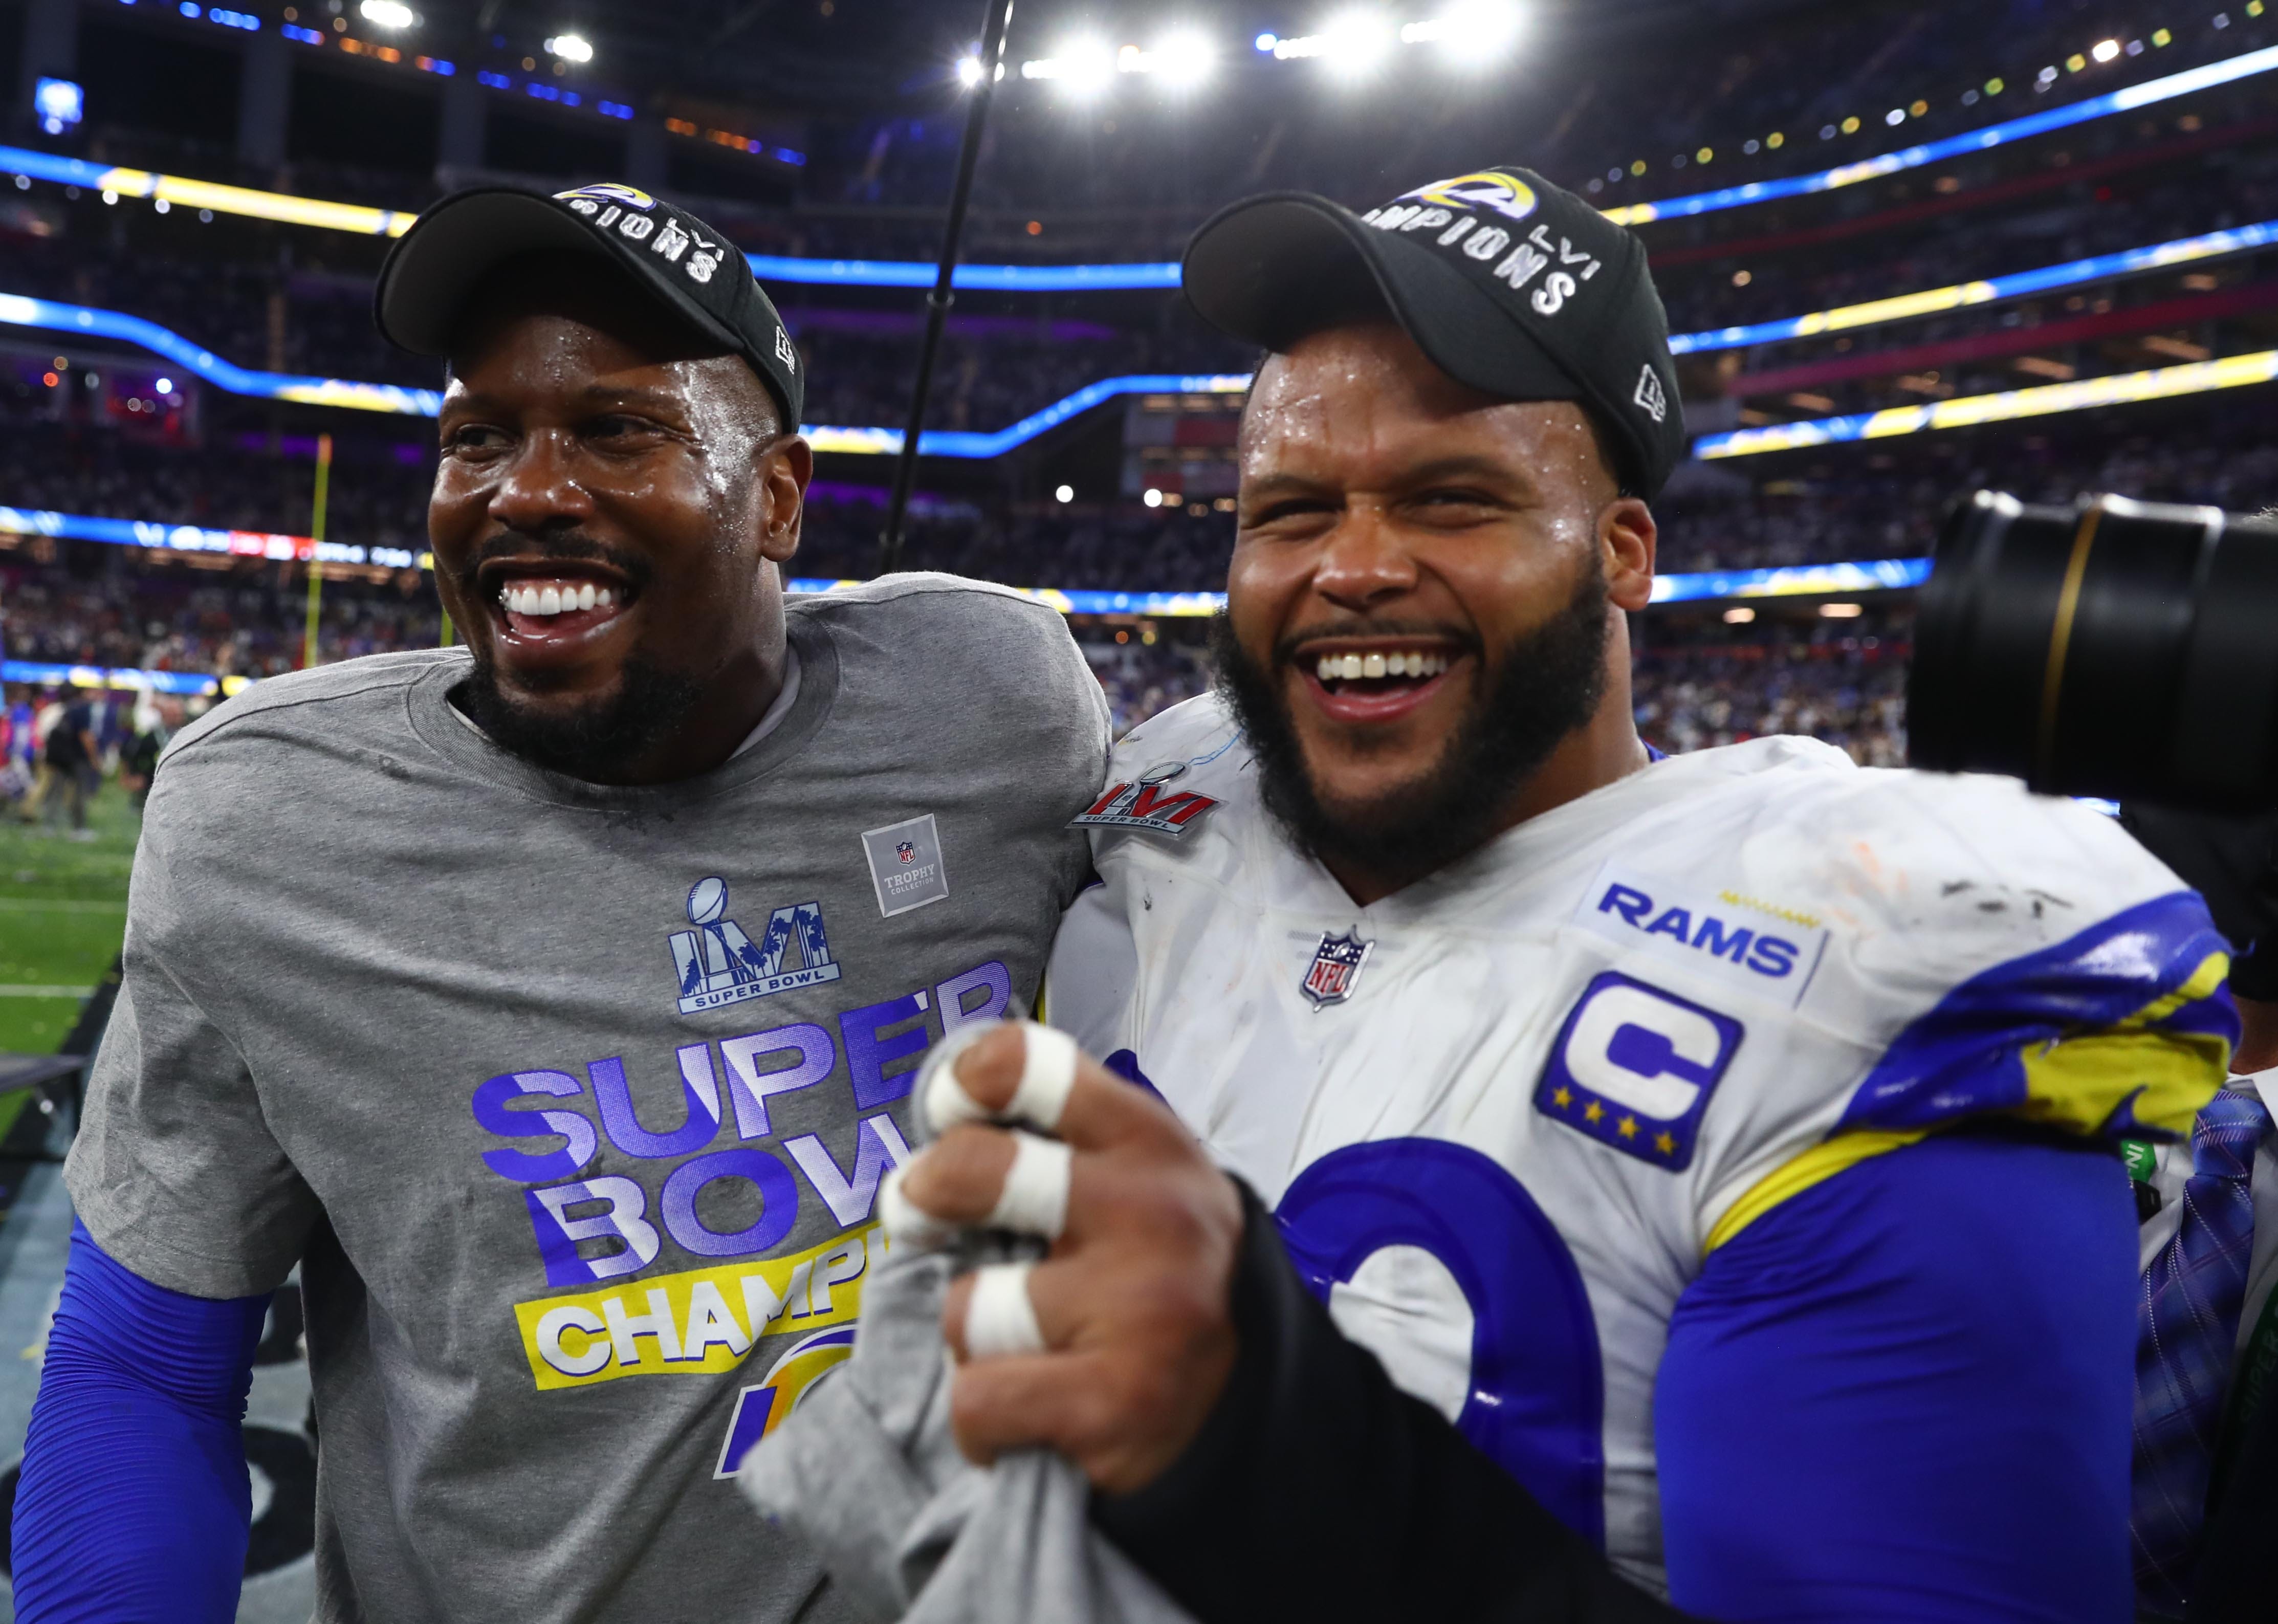 The 57 greatest players in Super Bowl history: Von Miller moves up, Aaron Donald enters list